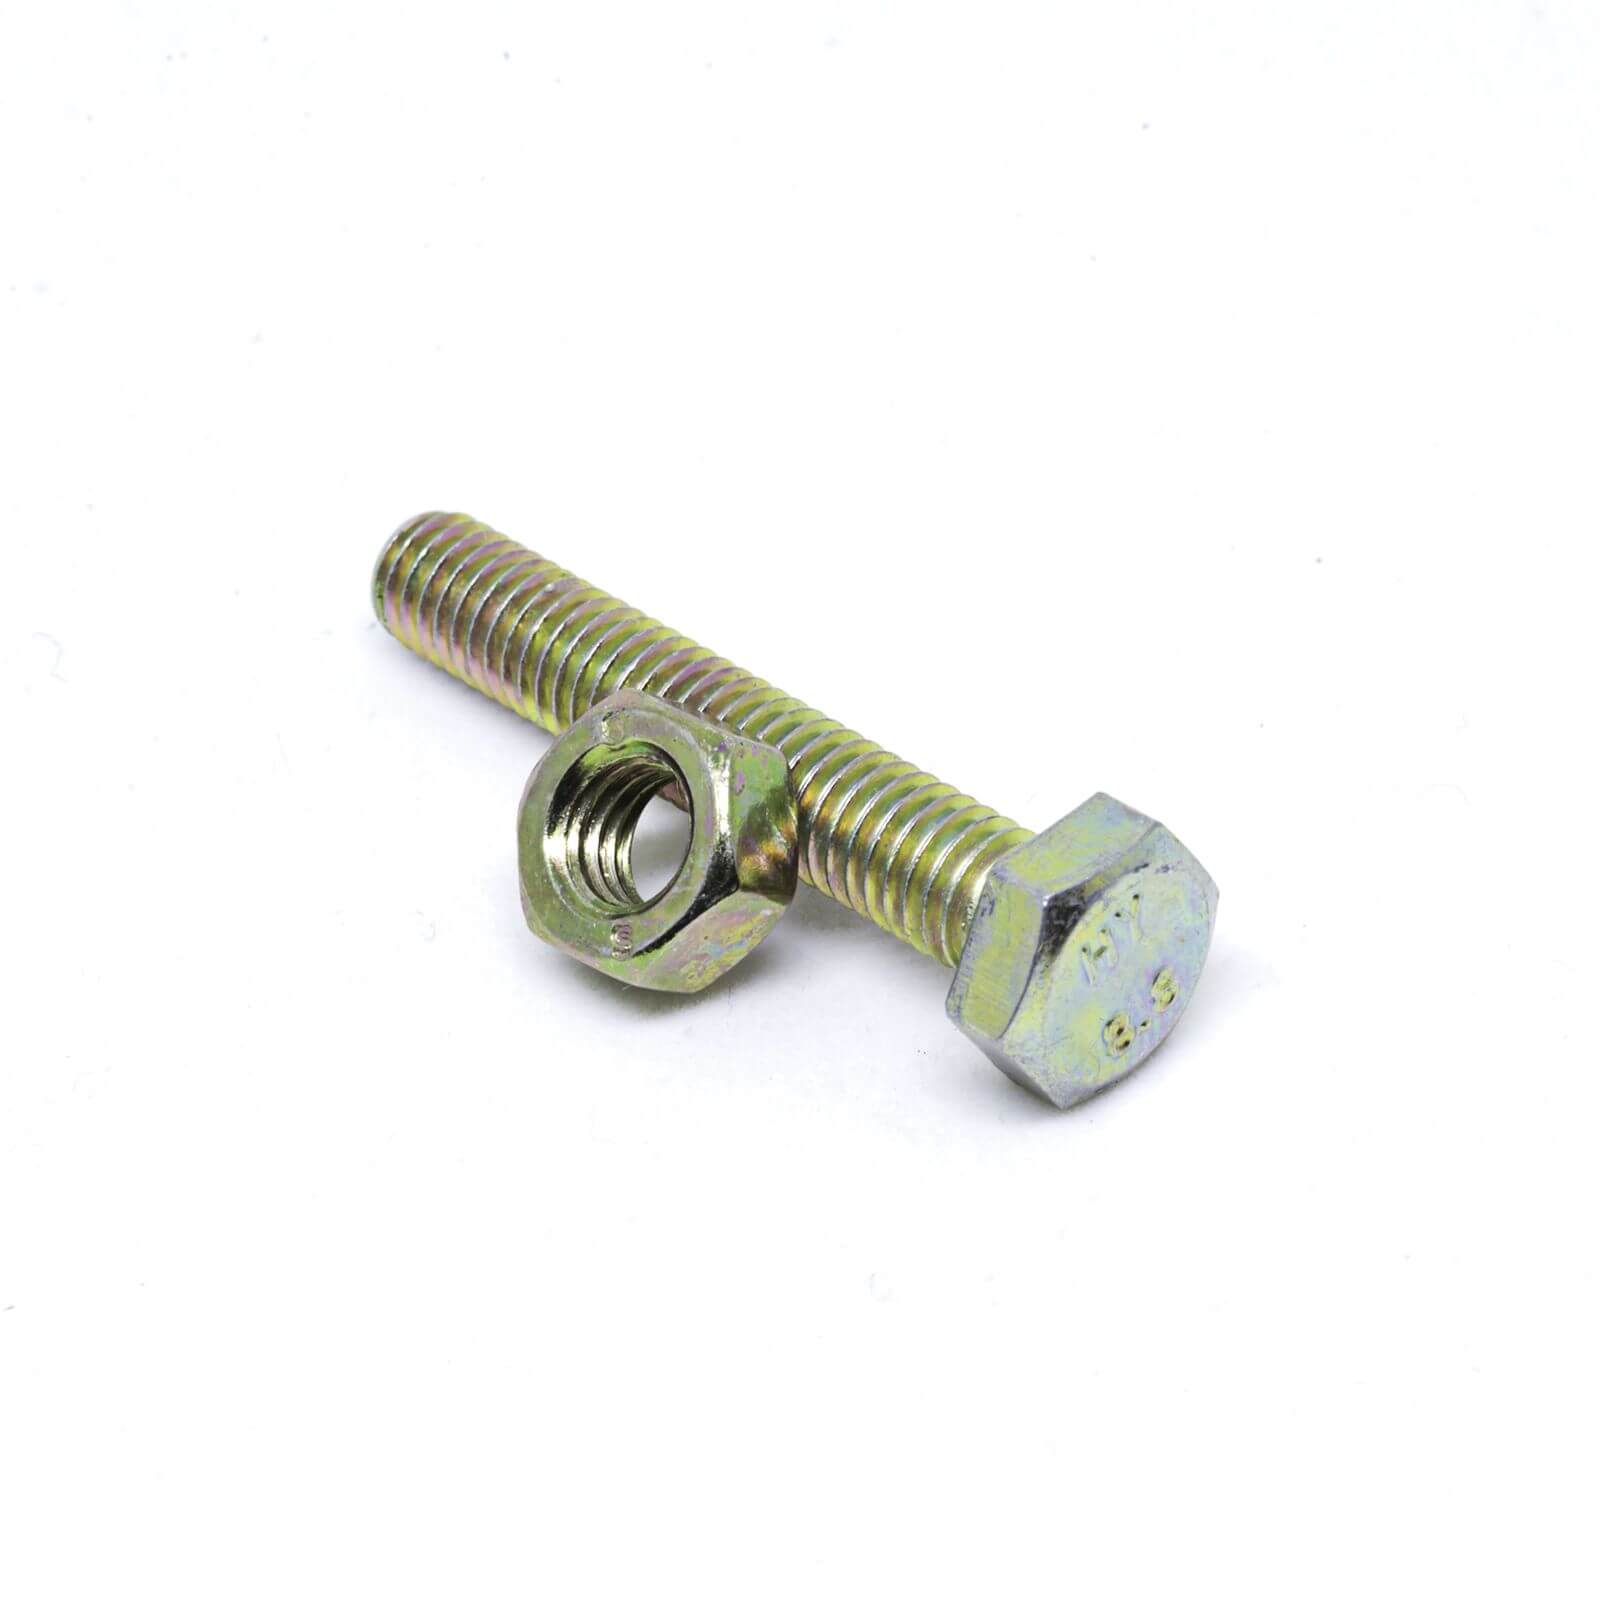 Pinnacle High Tensile Bolts and Nuts - 6 x 35mm - 5 Pack